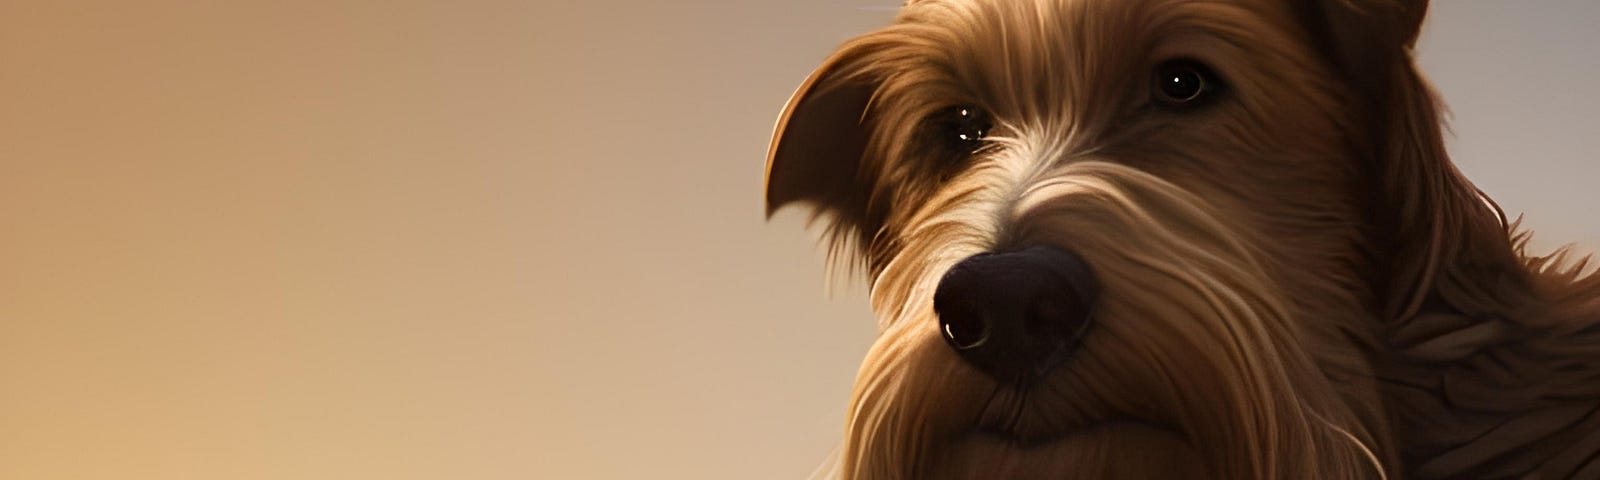 Image of soulful-looking dog generated by author using NightCafe